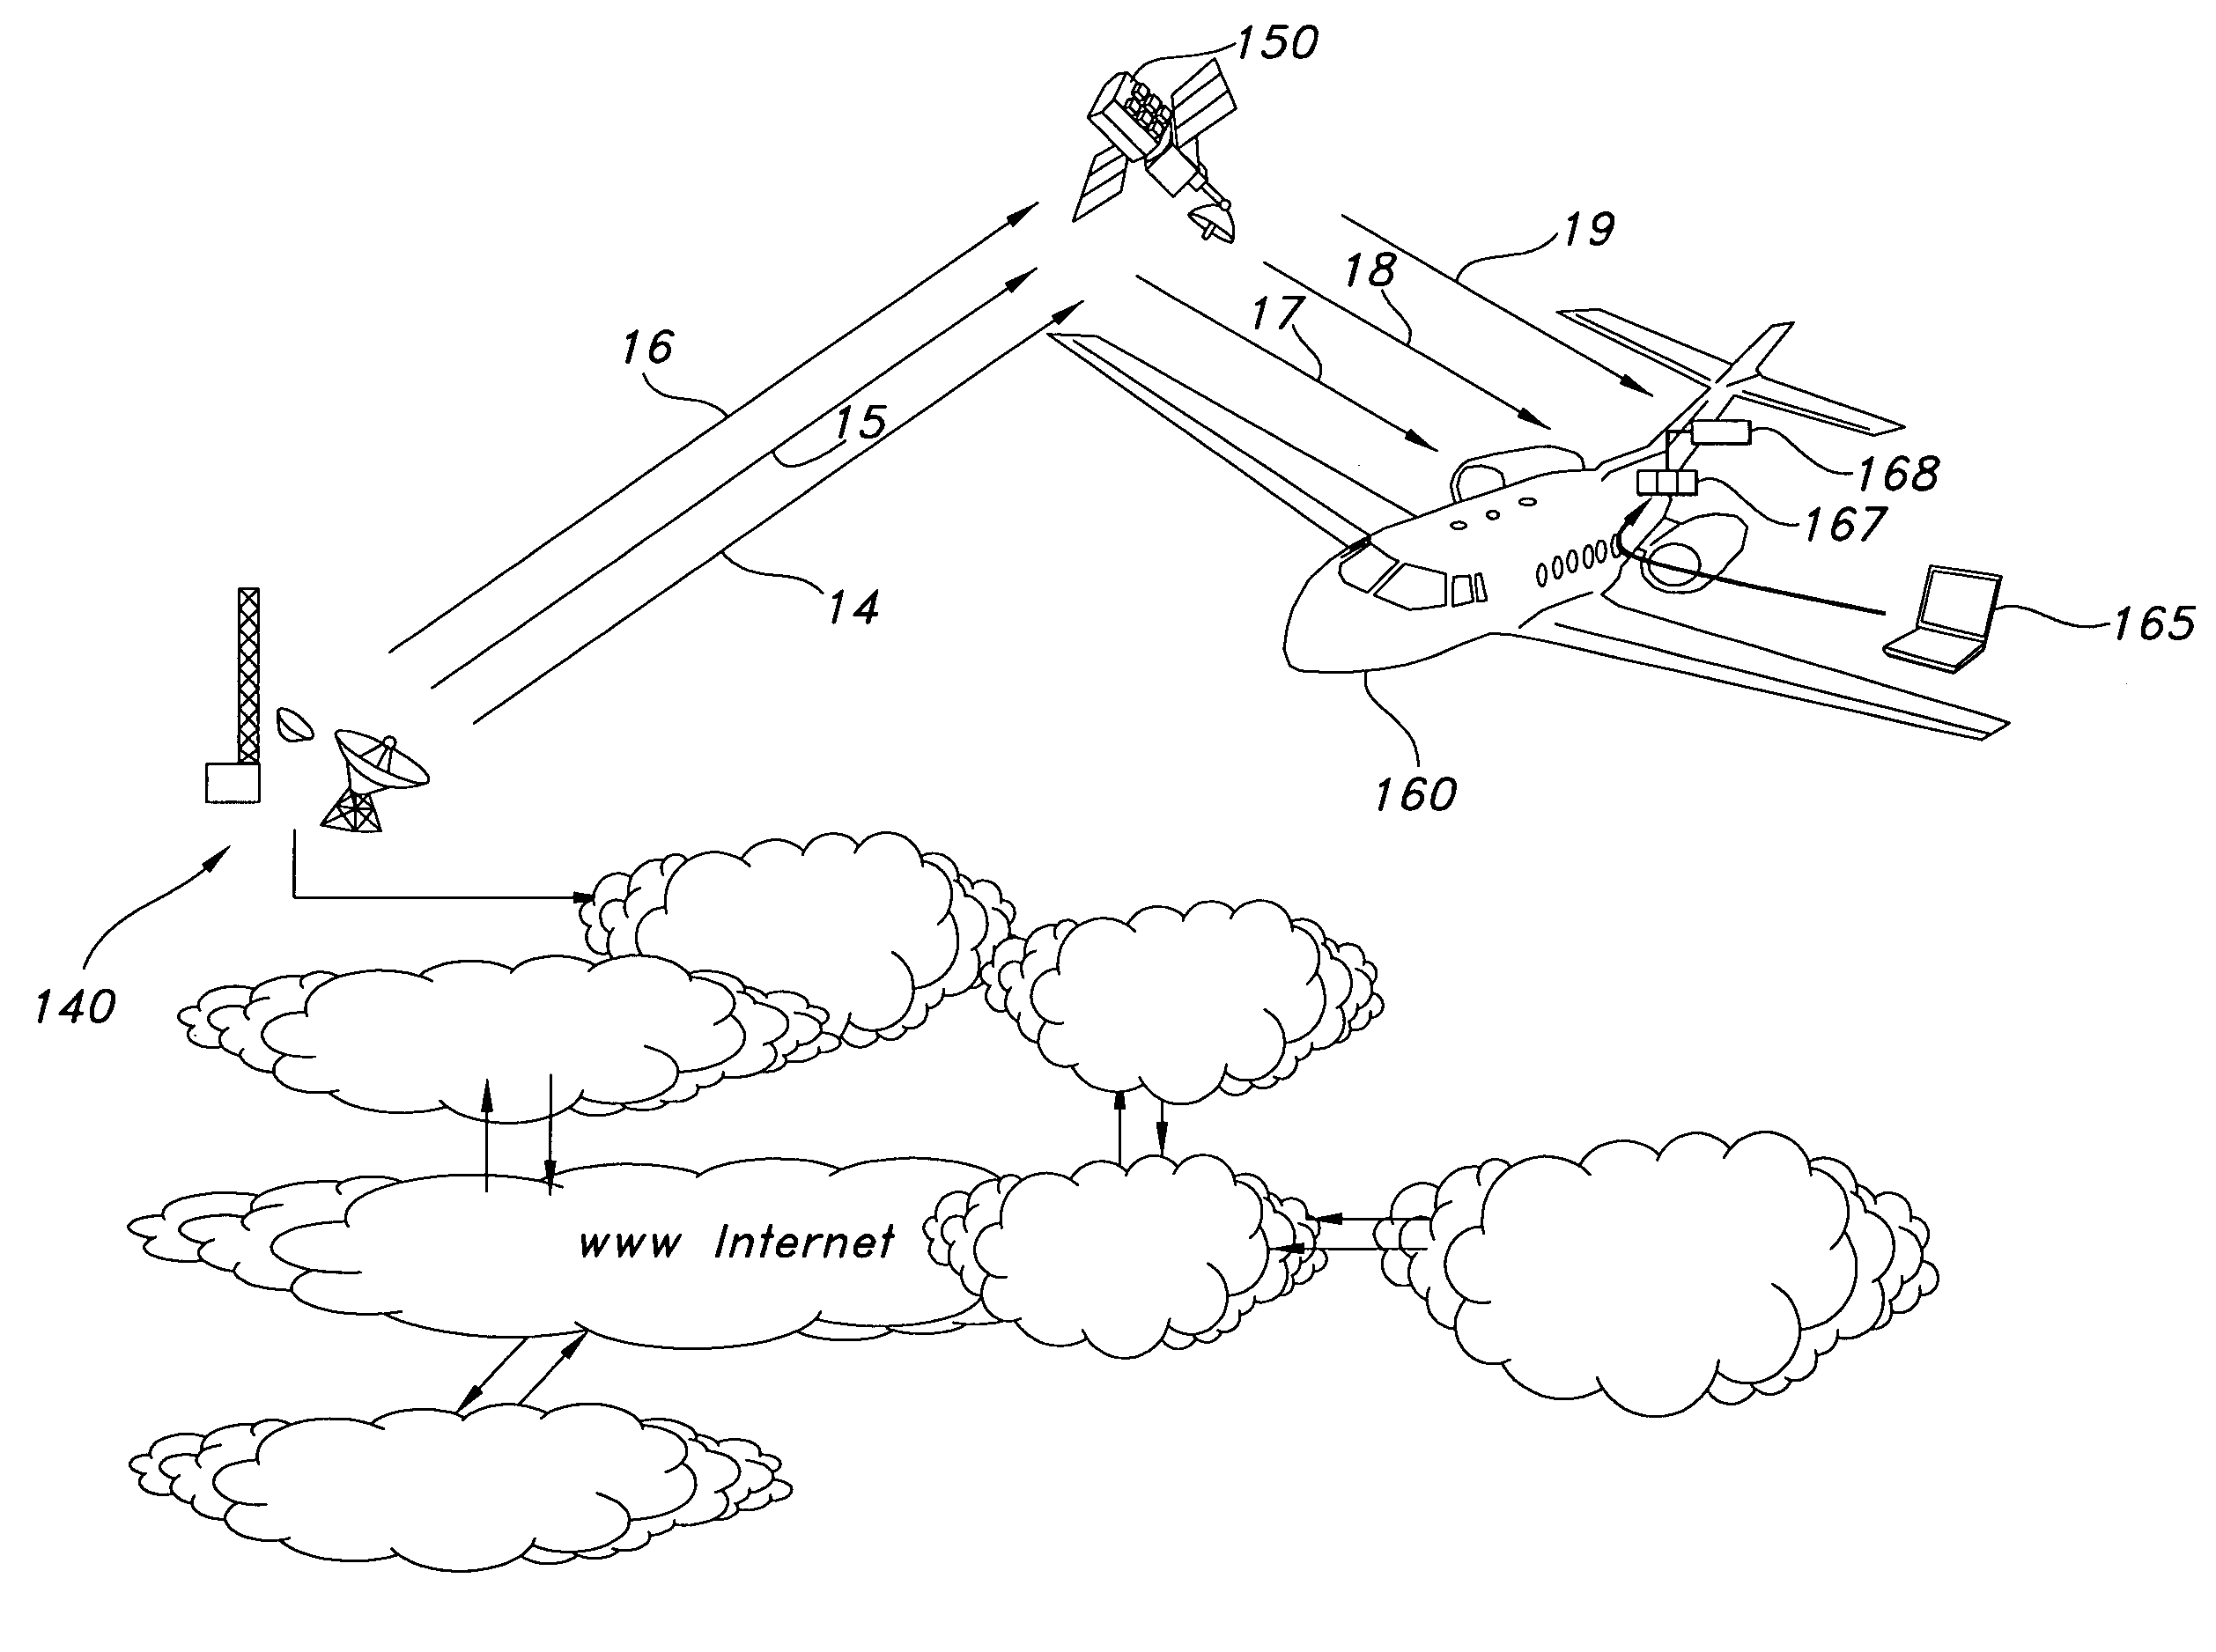 Low-latency/low link margin airborne satellite internet system and method using COTS infrastructure